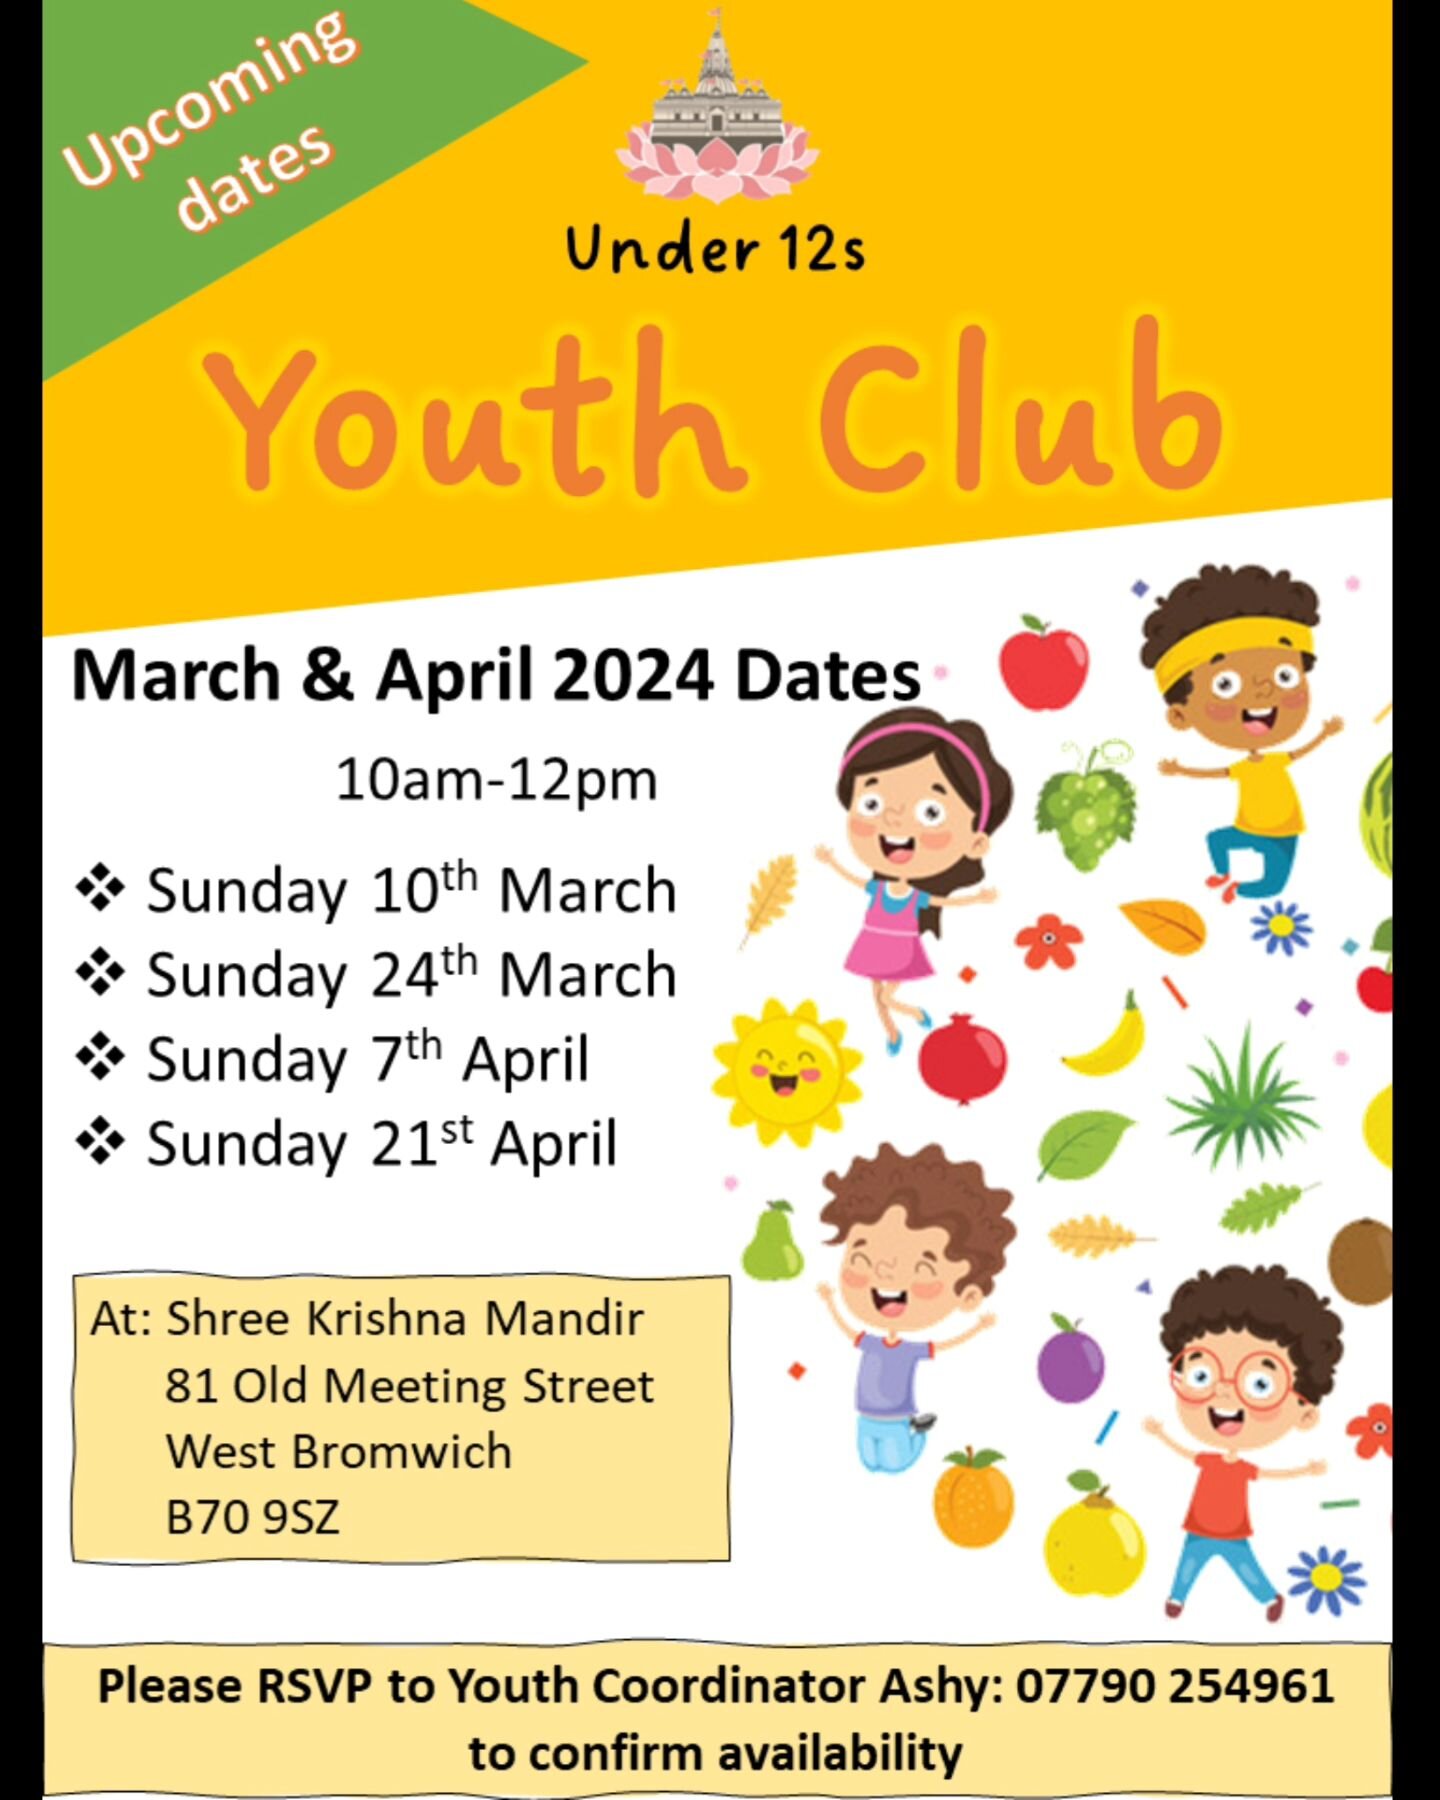 Jai Shree Krishna 

Shree Krishna Mandir is pleased to announce the&nbsp;Youth&nbsp;Club dates for March and April 2024.&nbsp;Youth&nbsp;Club will take place between 10am to midday. Please RSVP to reserve your place.

Snacks and soft drinks will be a